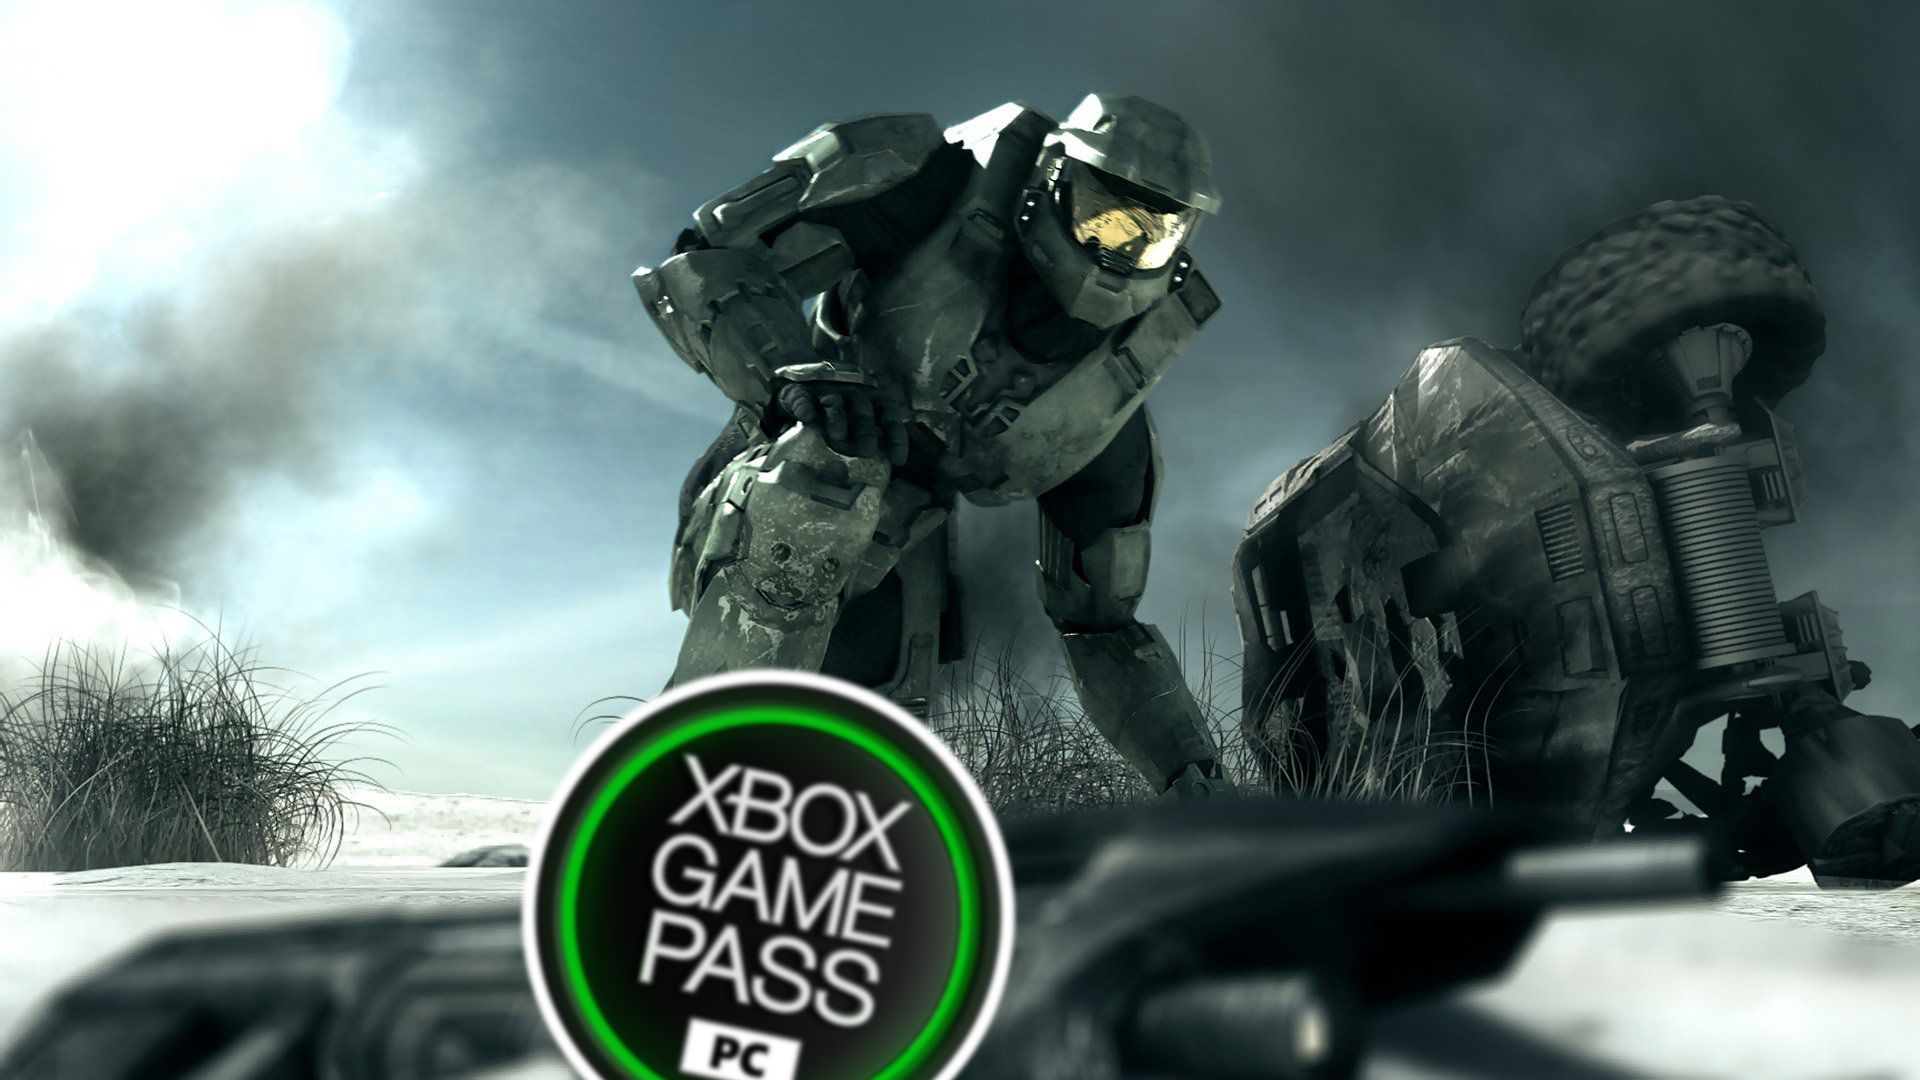 Best Xbox Game Pass PC games in 2021